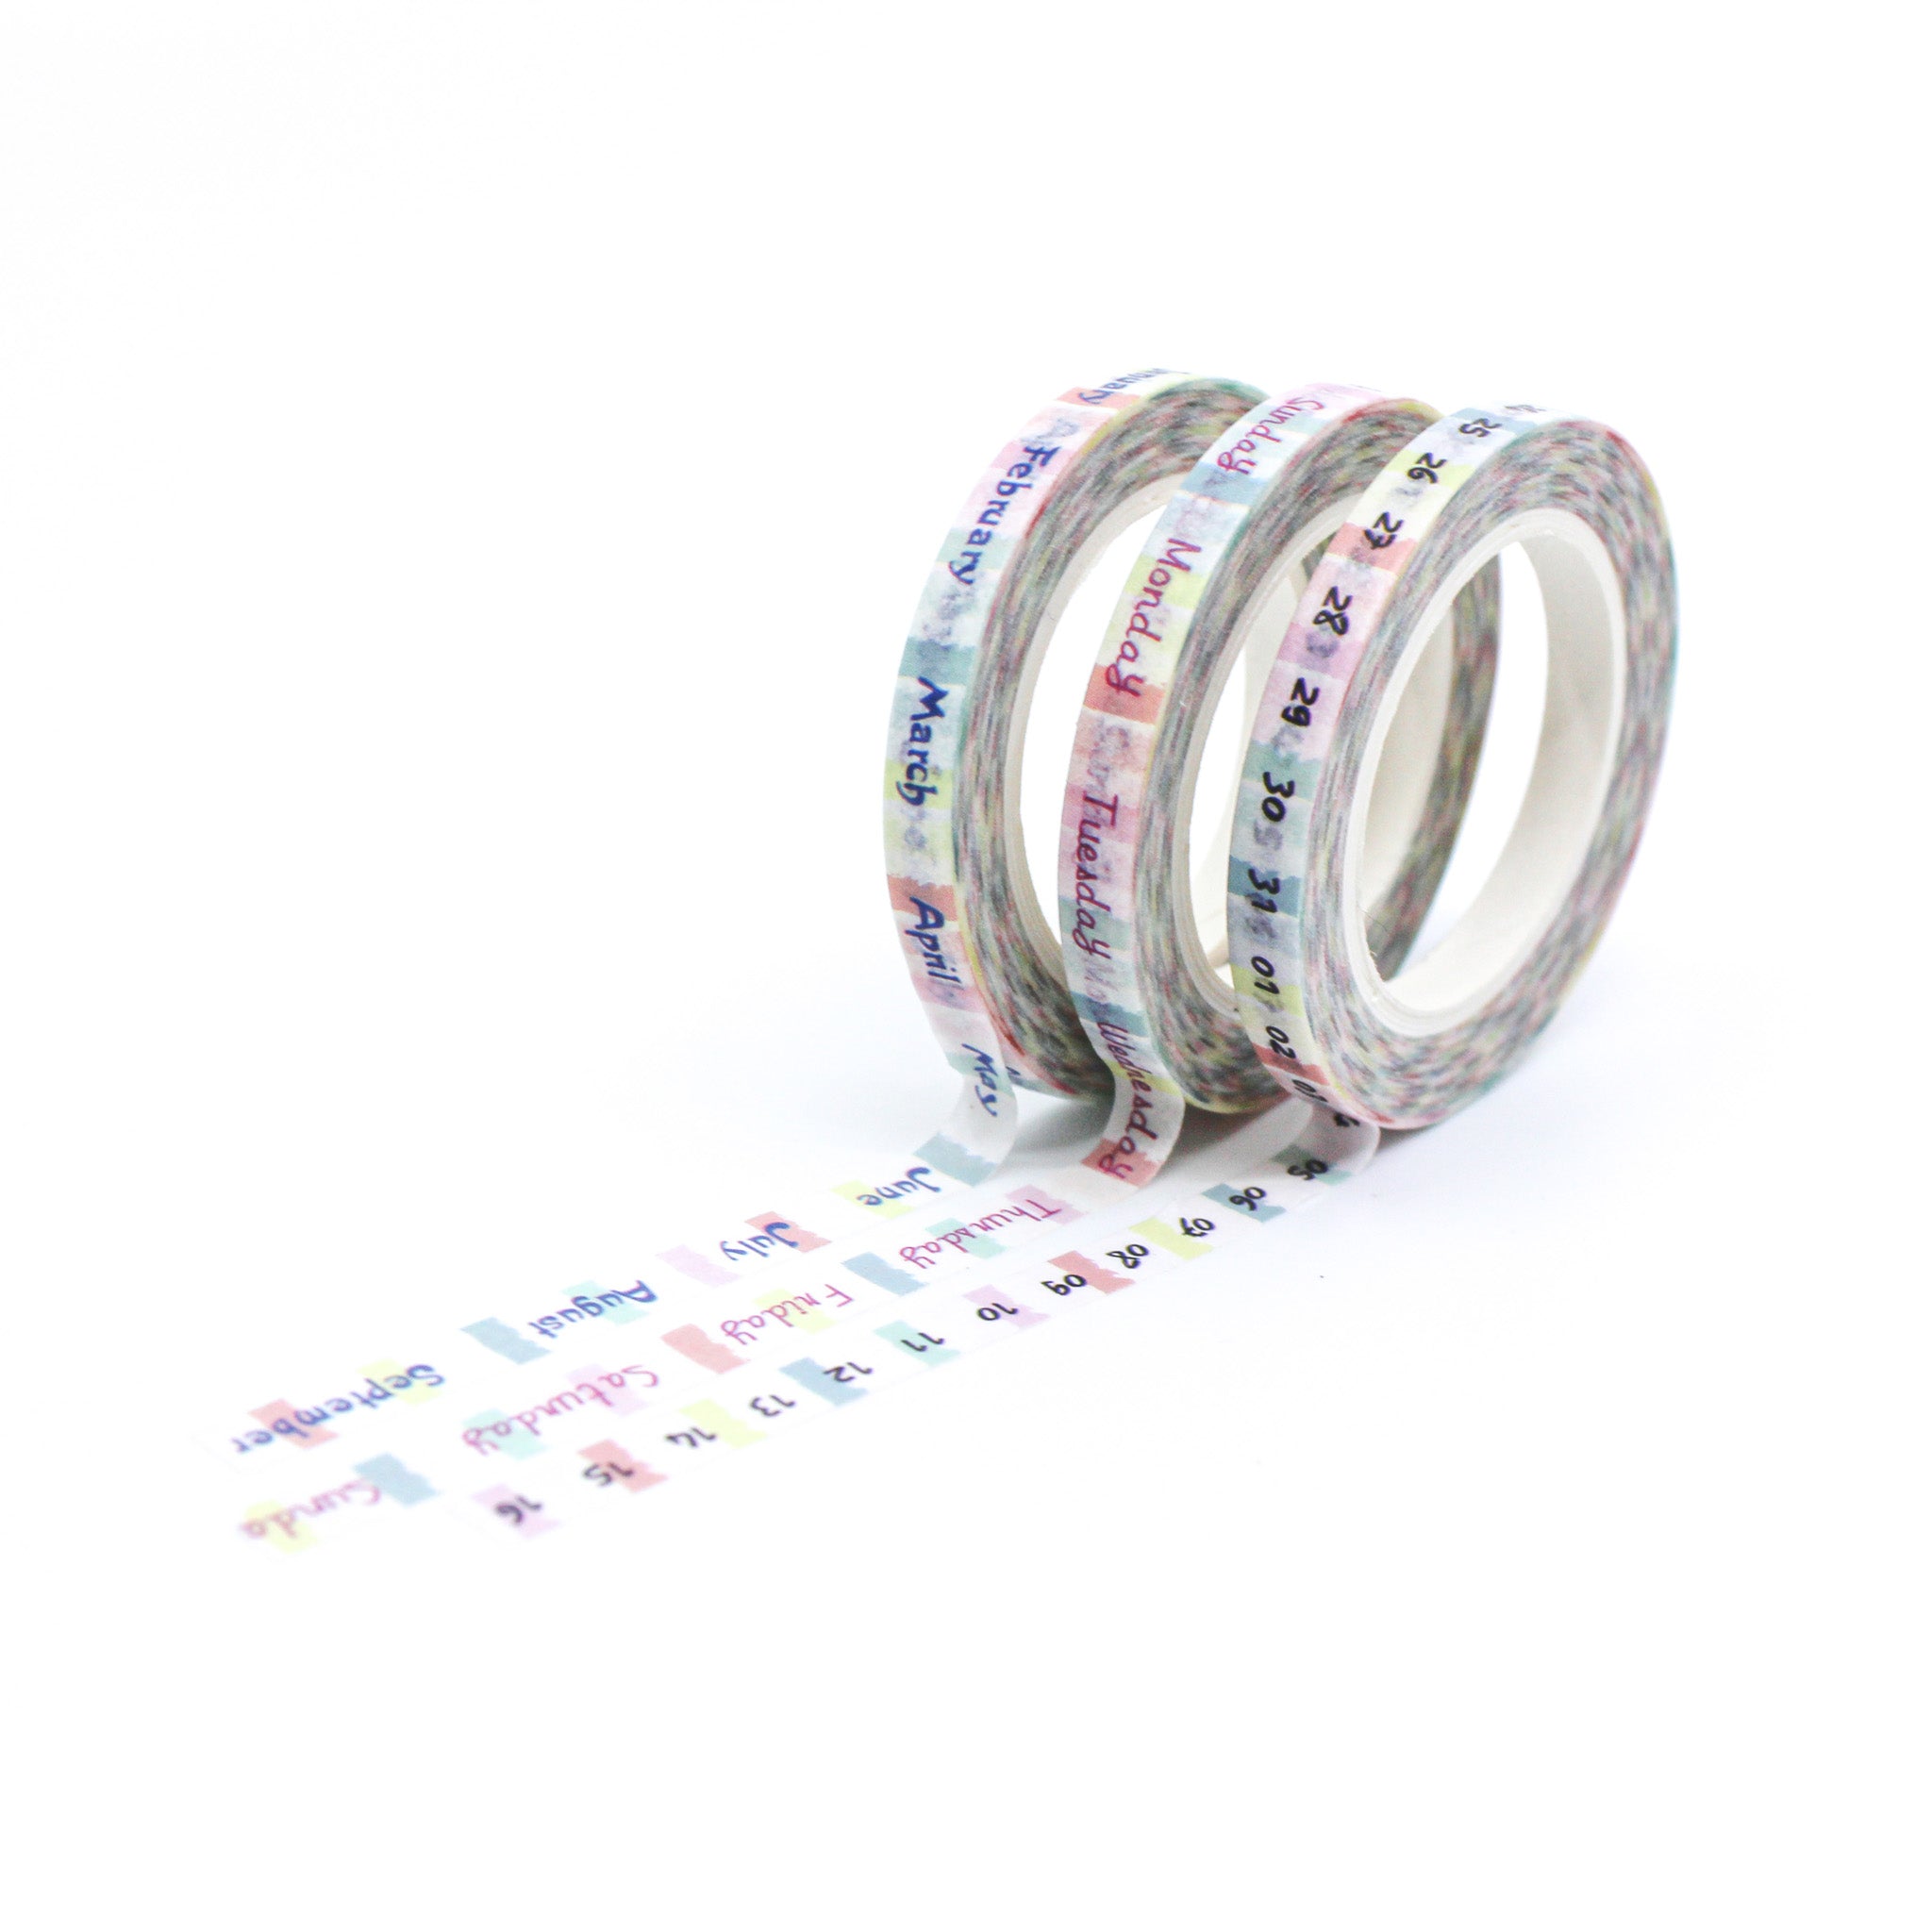 My all time favorite washi tapes (and how I organize them)